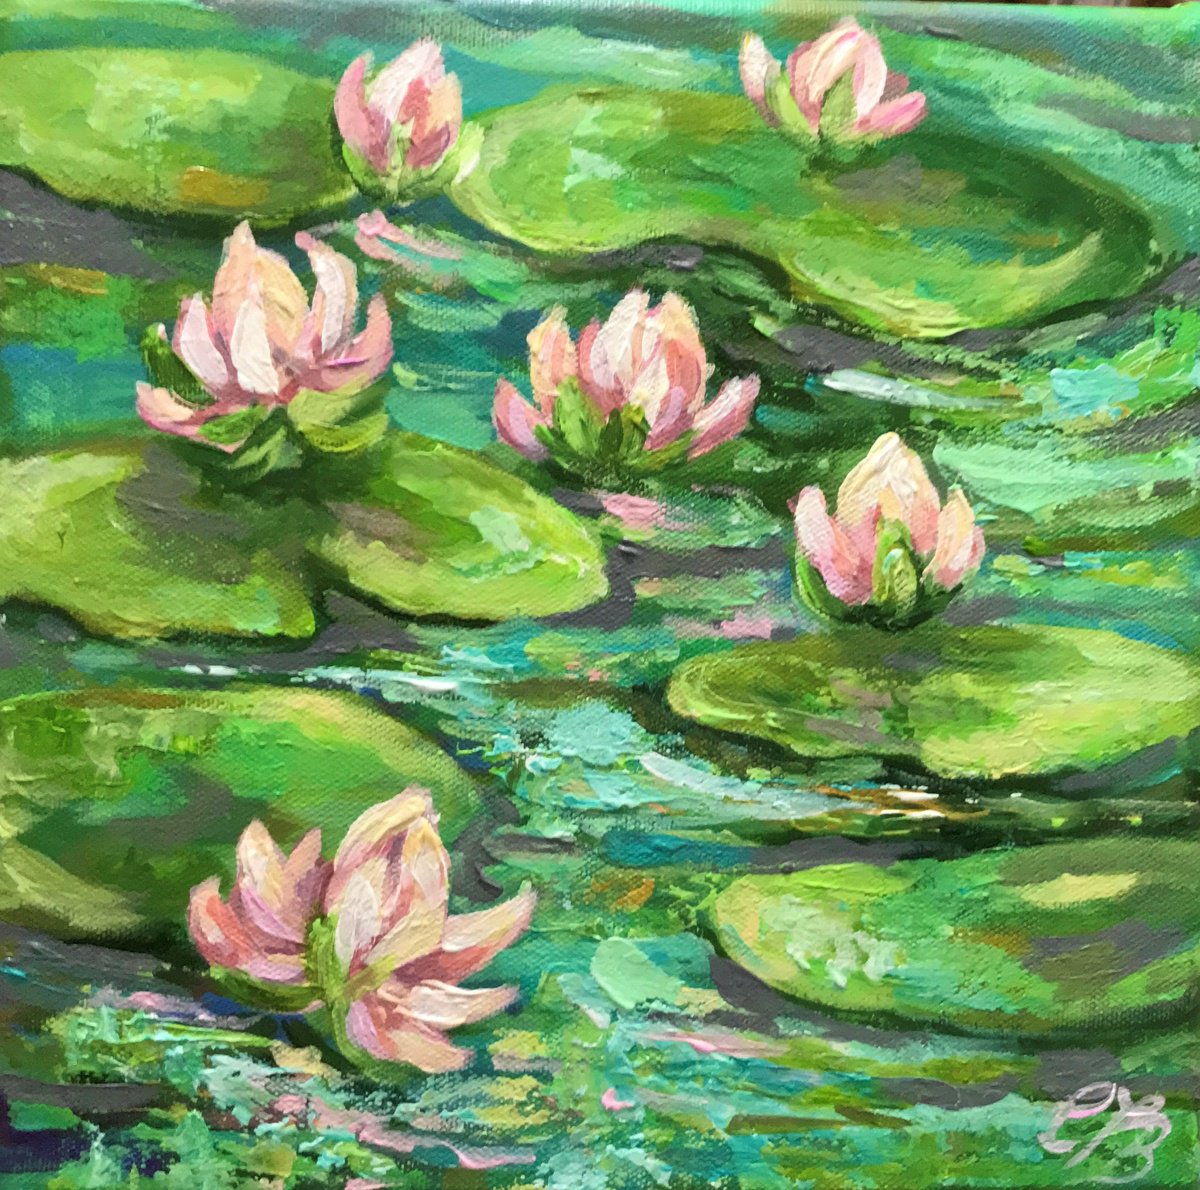 Small Water Lily no 2 by Colette Baumback